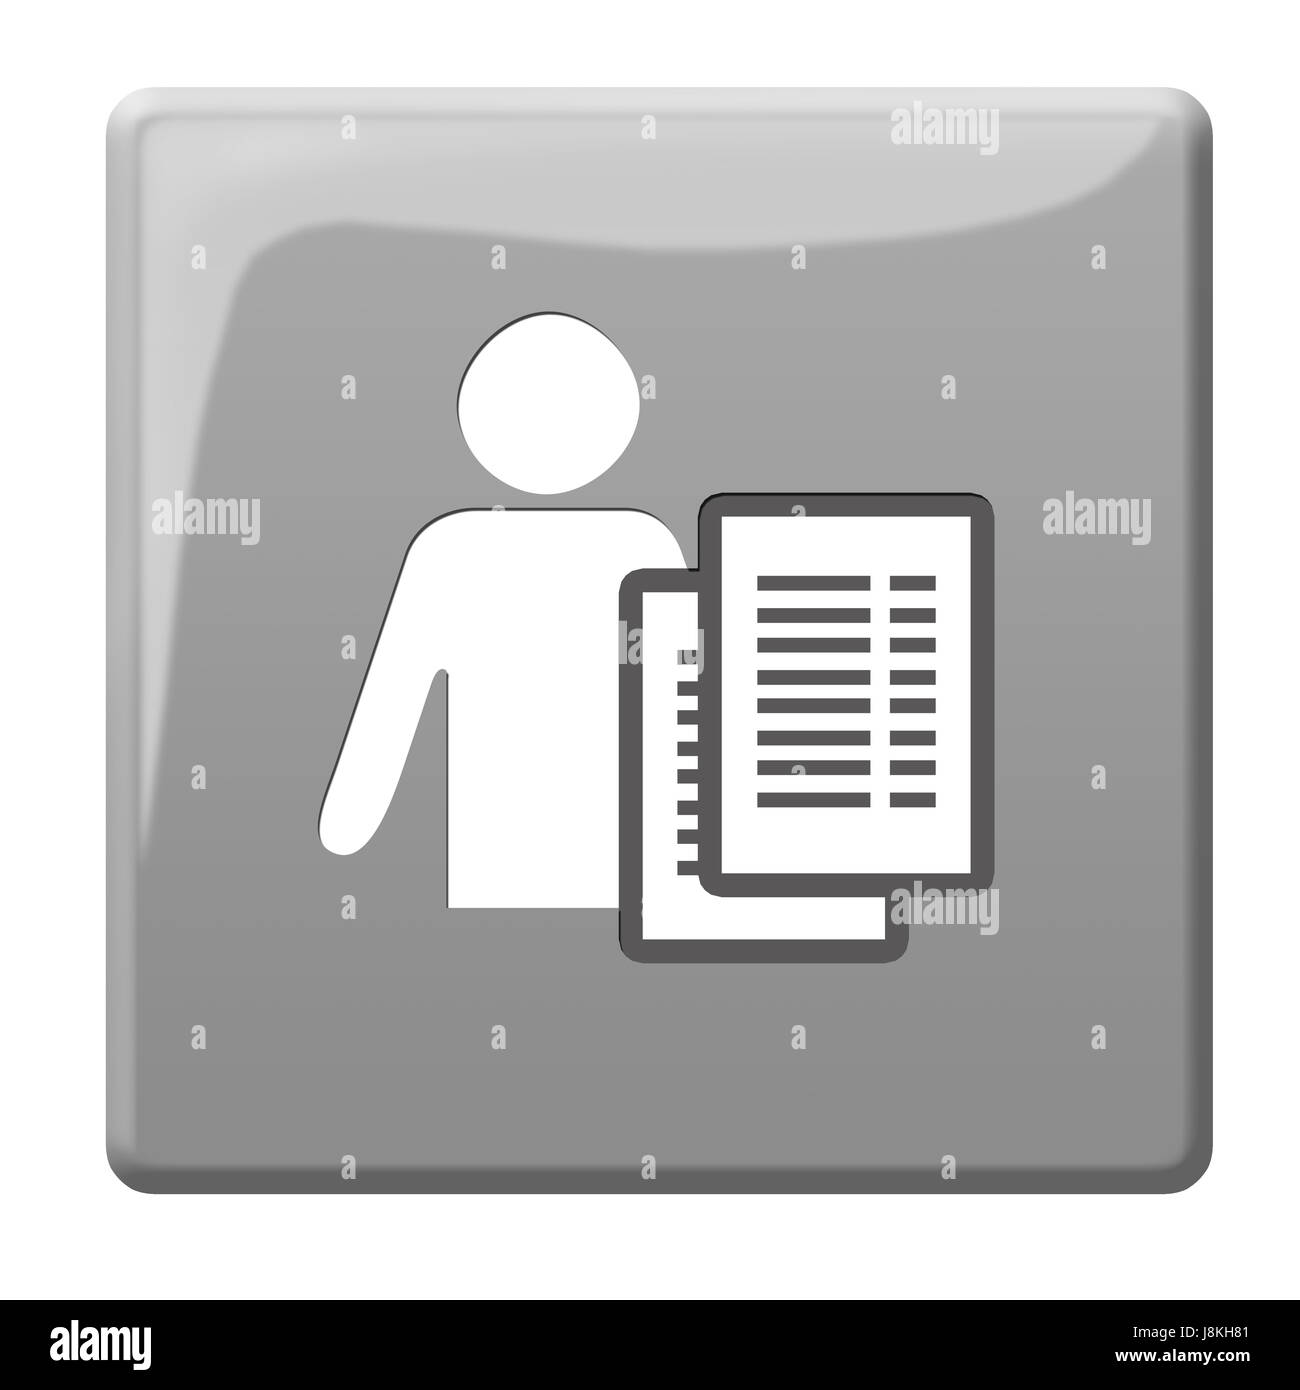 person, catalogue, personal, list, login, internal, sign, signal, isolated, Stock Photo